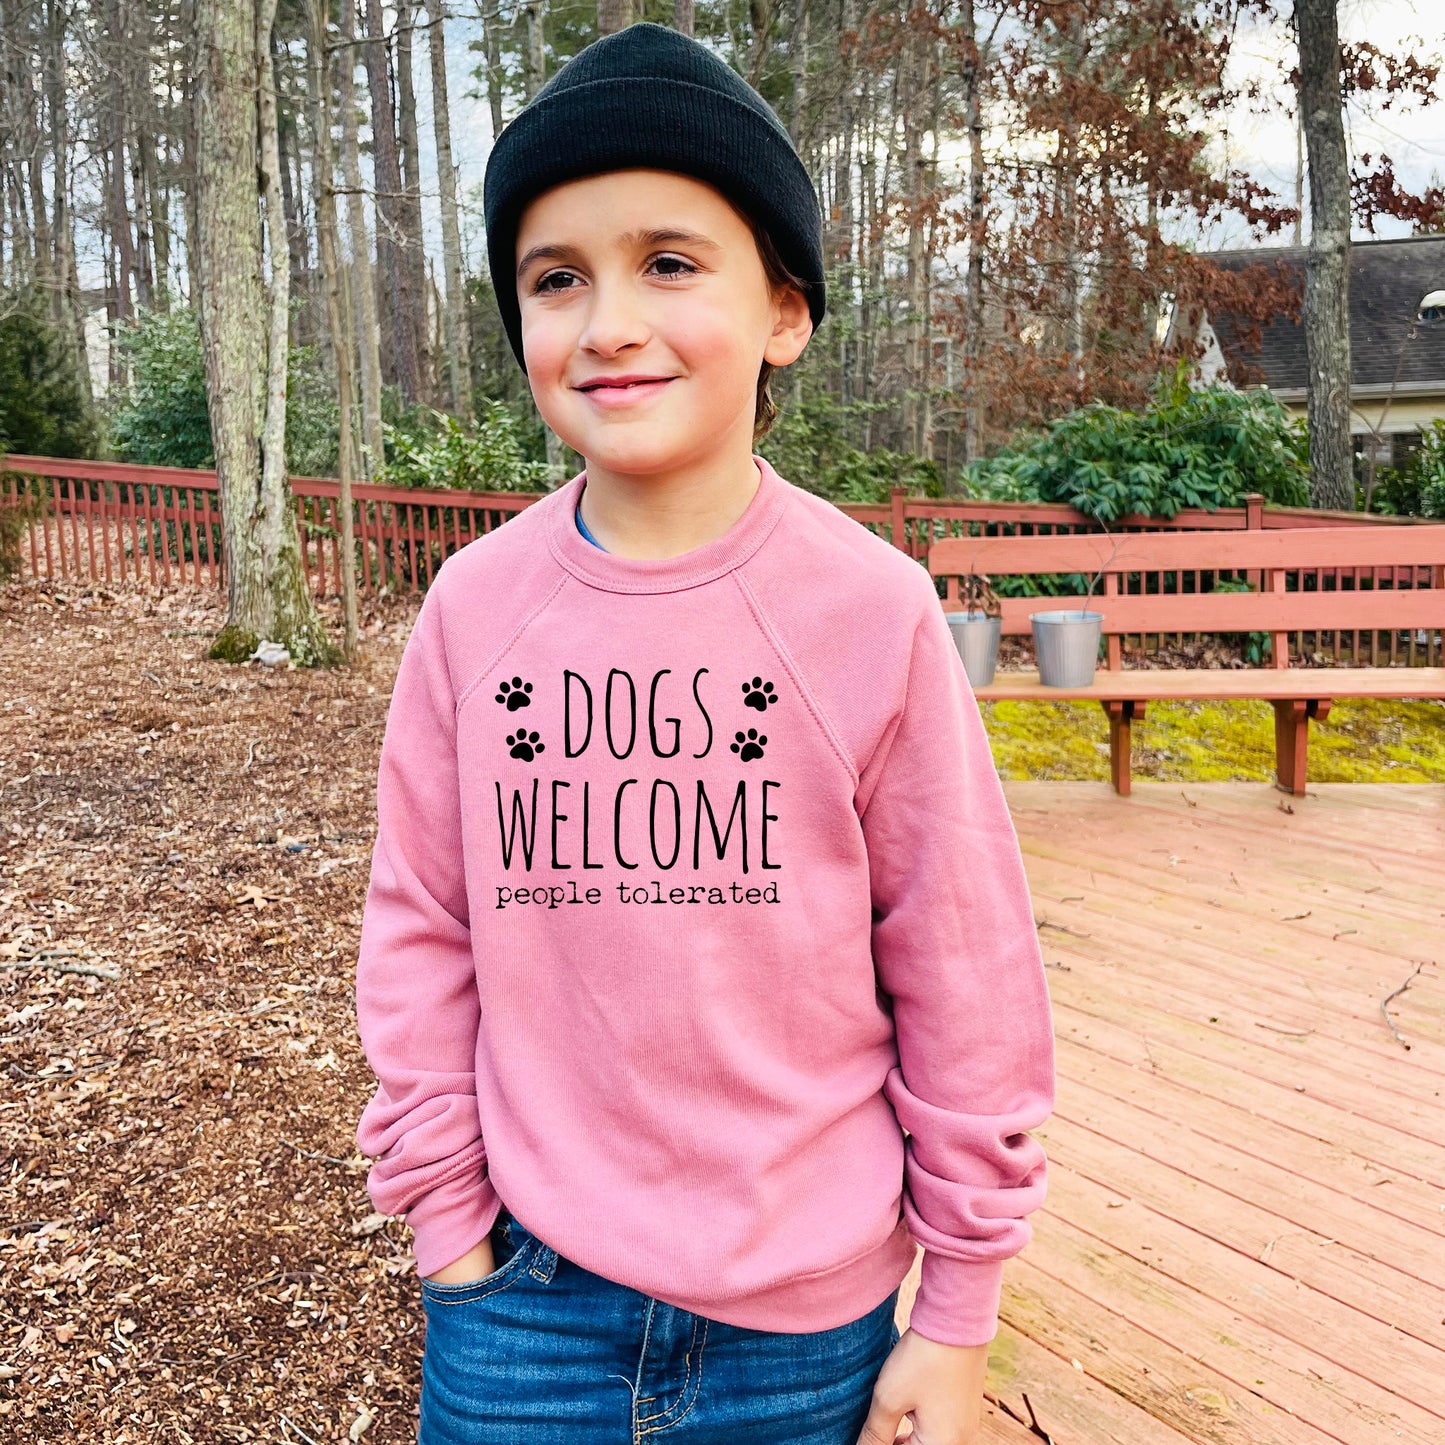 Dogs Welcome, People Tolerated - Kid's Sweatshirt - Heather Gray or Mauve